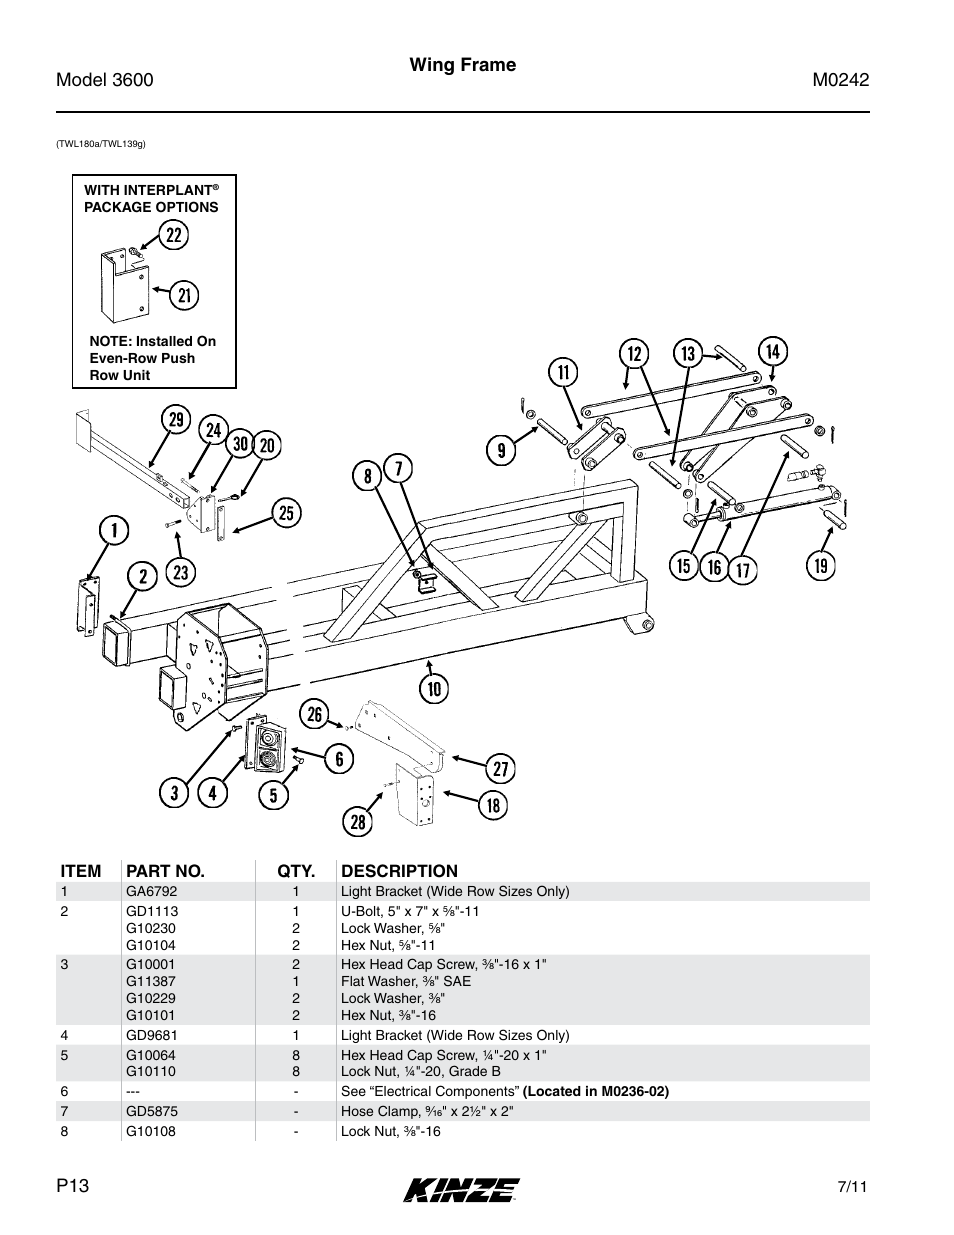 Wing frame | Kinze 3600 Lift and Rotate Planter Rev. 6/14 User Manual | Page 16 / 40